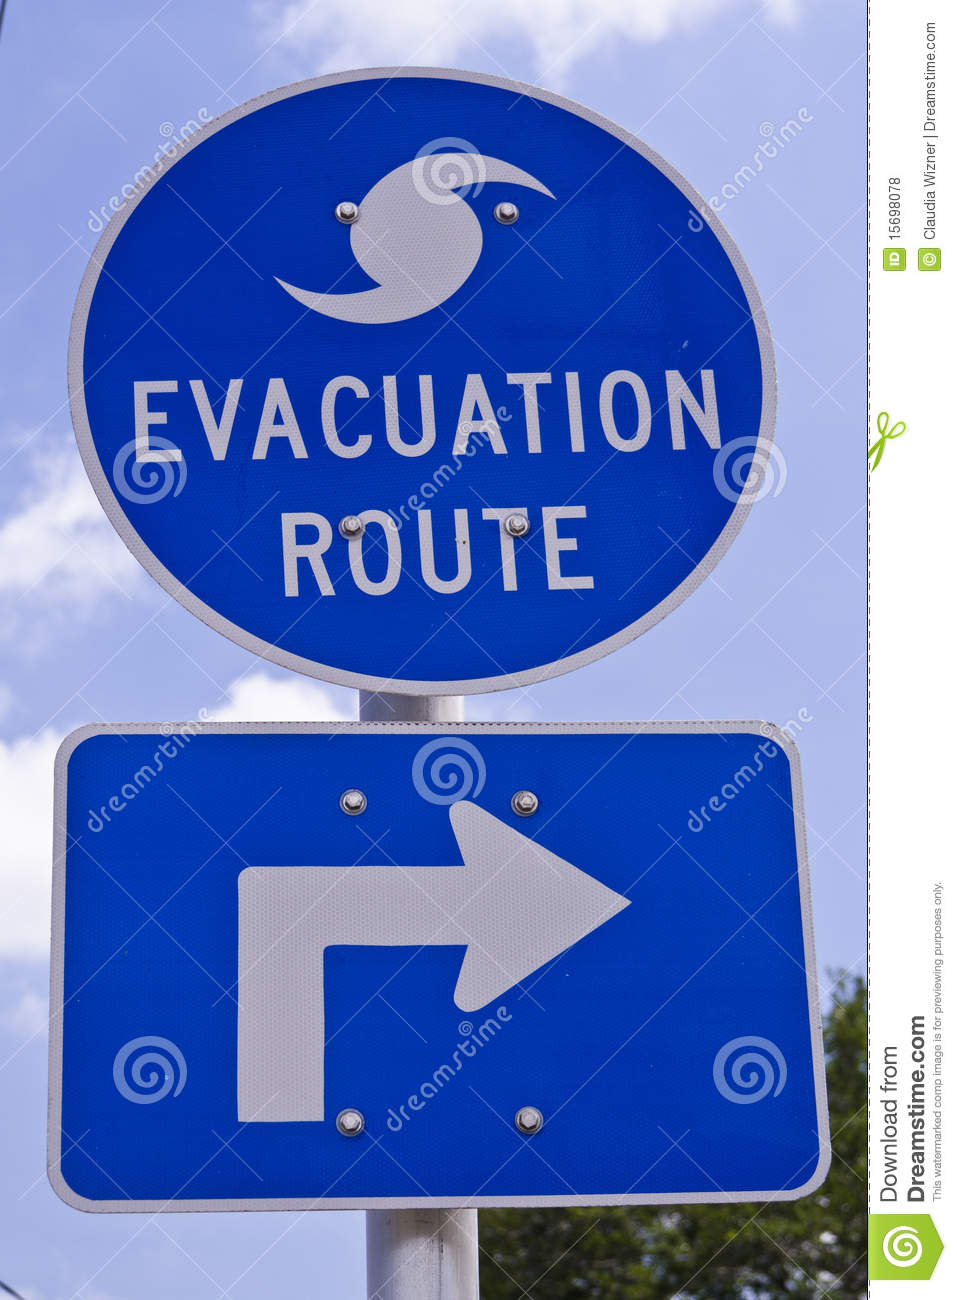 Evacuation Route Signs Are A Common Sight In The South And Show The